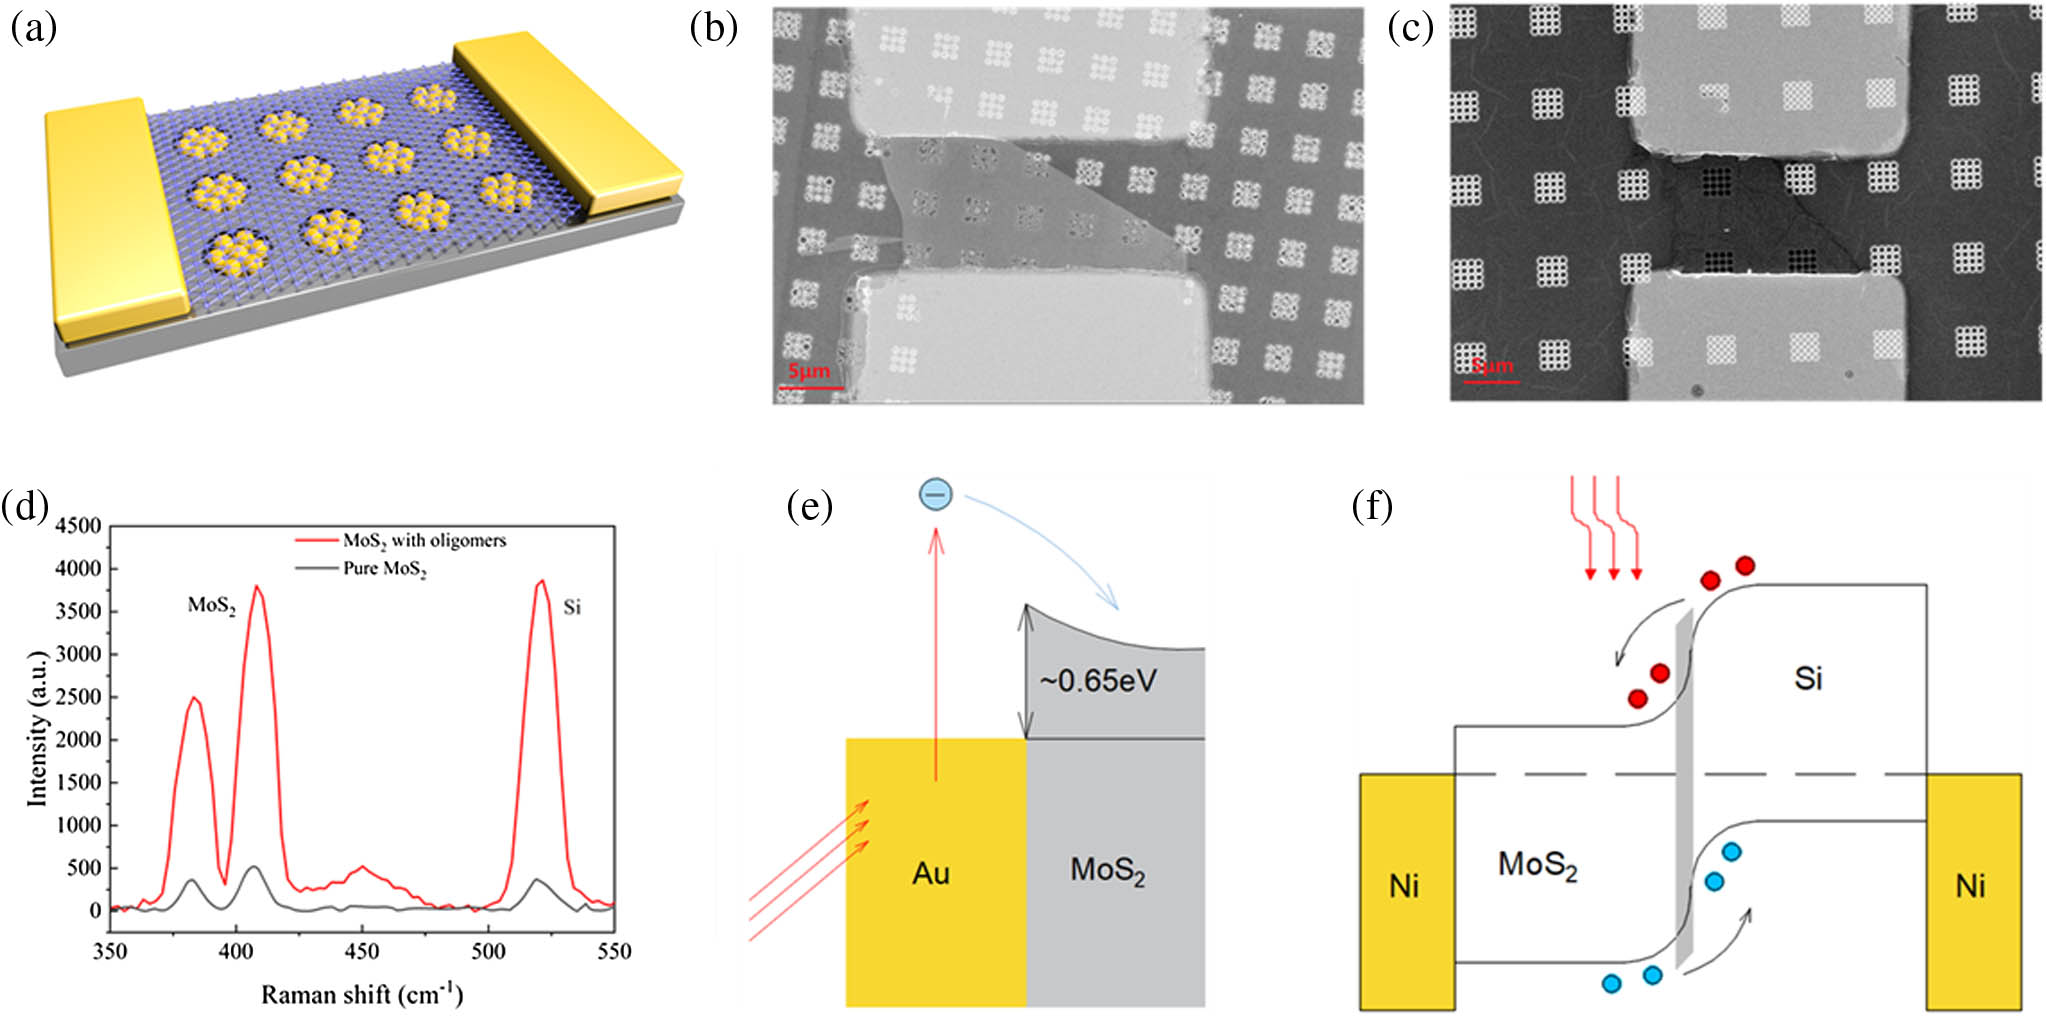 (a) Schematic of the photodetector. (b) SEM image of the photodetector. (c) SEM images of the photodetectors of the control group. (d) Raman spectra of the MoS2 on devices. (e) Schematic illustration of the internal photoemission in the Au-MoS2 Schottky junction. (f) Energy band diagram of Si/MoS2.